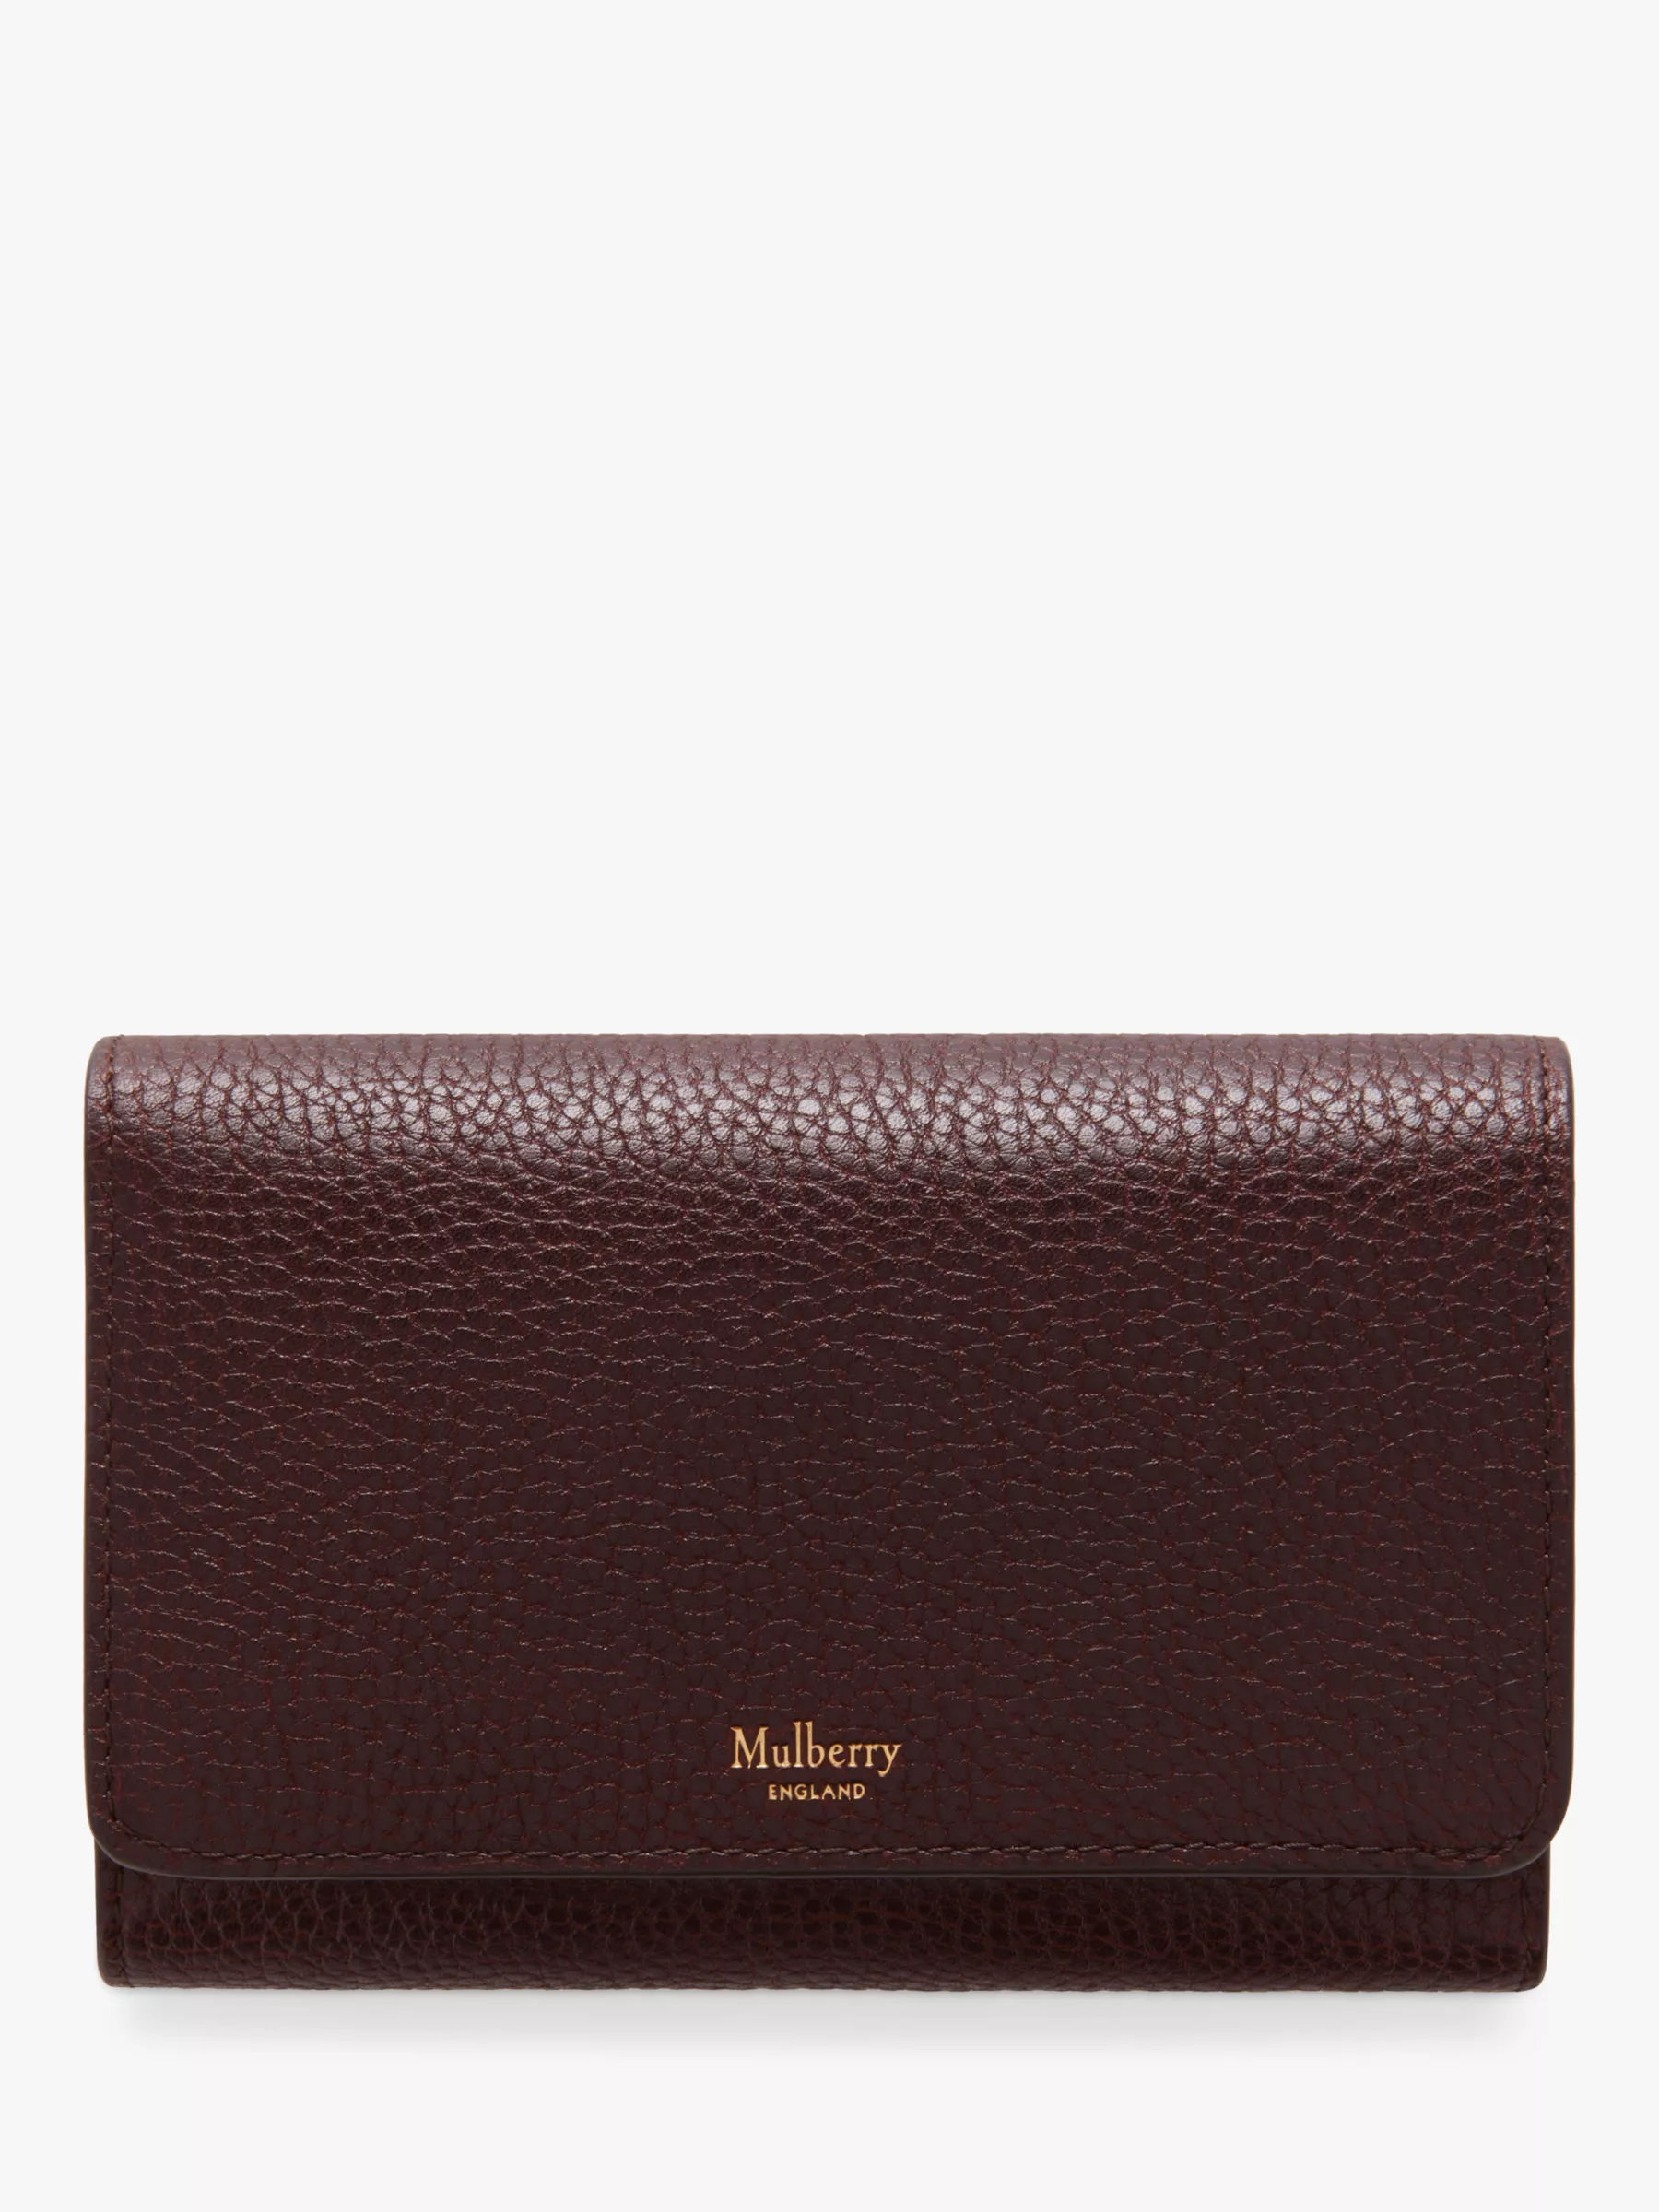 Mulberry Black Leather Small Continental Wallet Mulberry | TLC